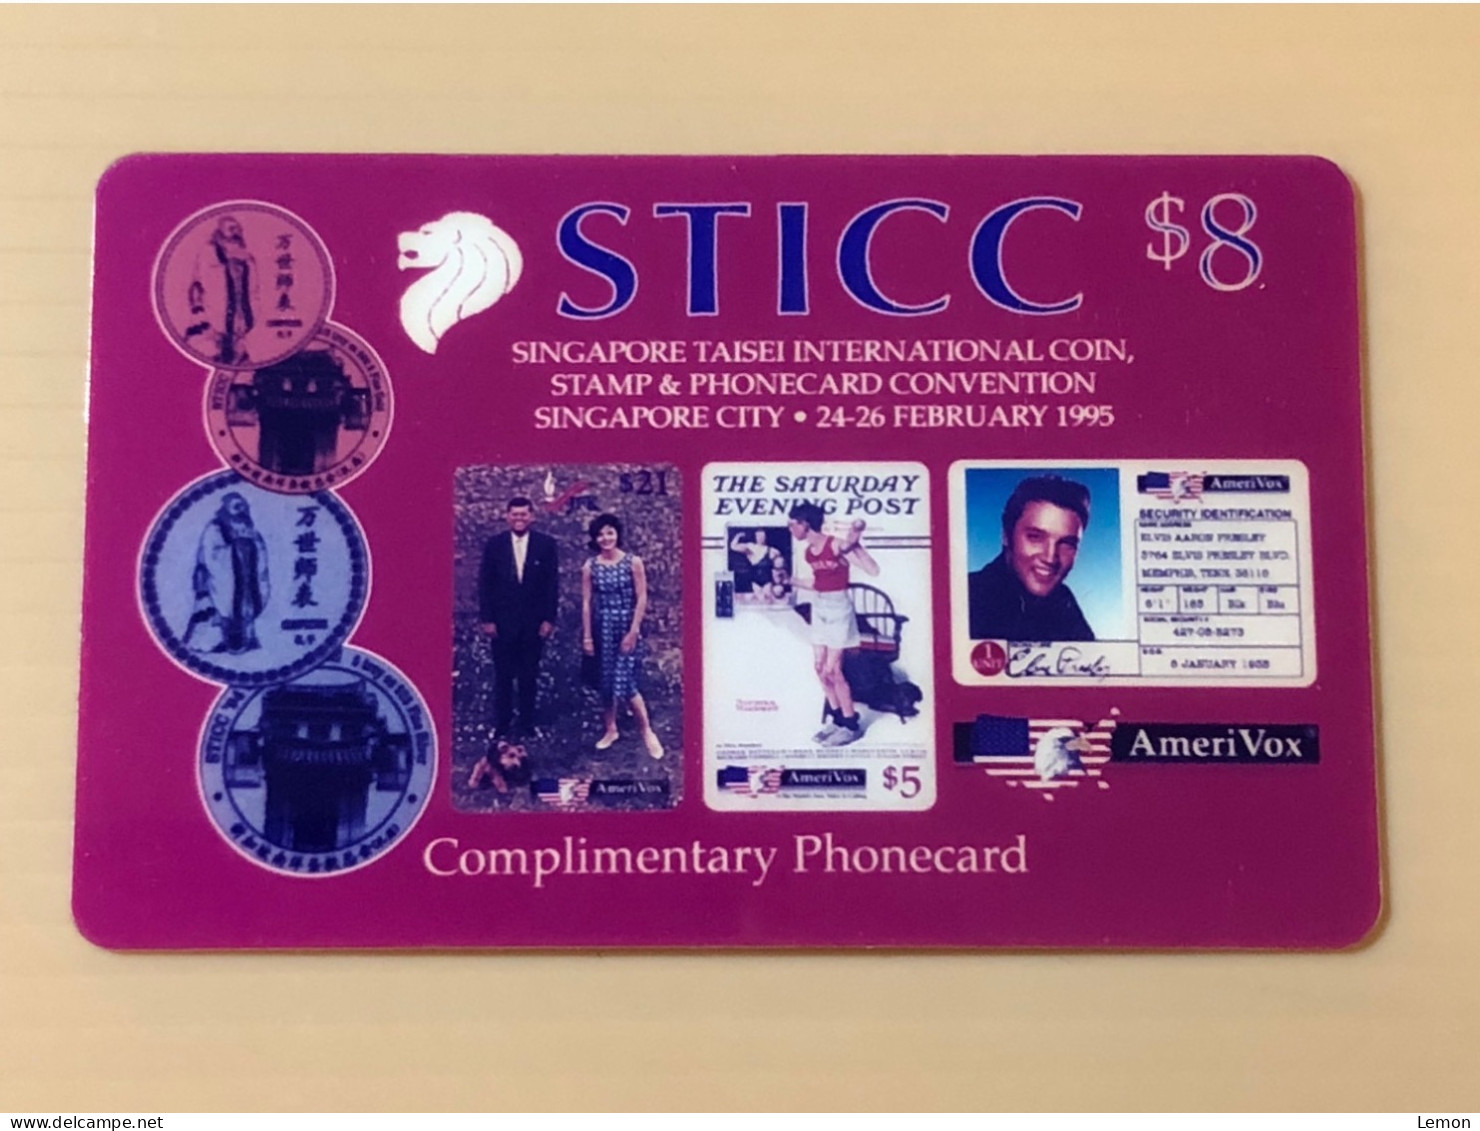 Mint USA UNITED STATES America Prepaid Telecard Phonecard, STICC Complimentary SAMPLE CARD(EX888), Set Of 1 Mint Card - Colecciones